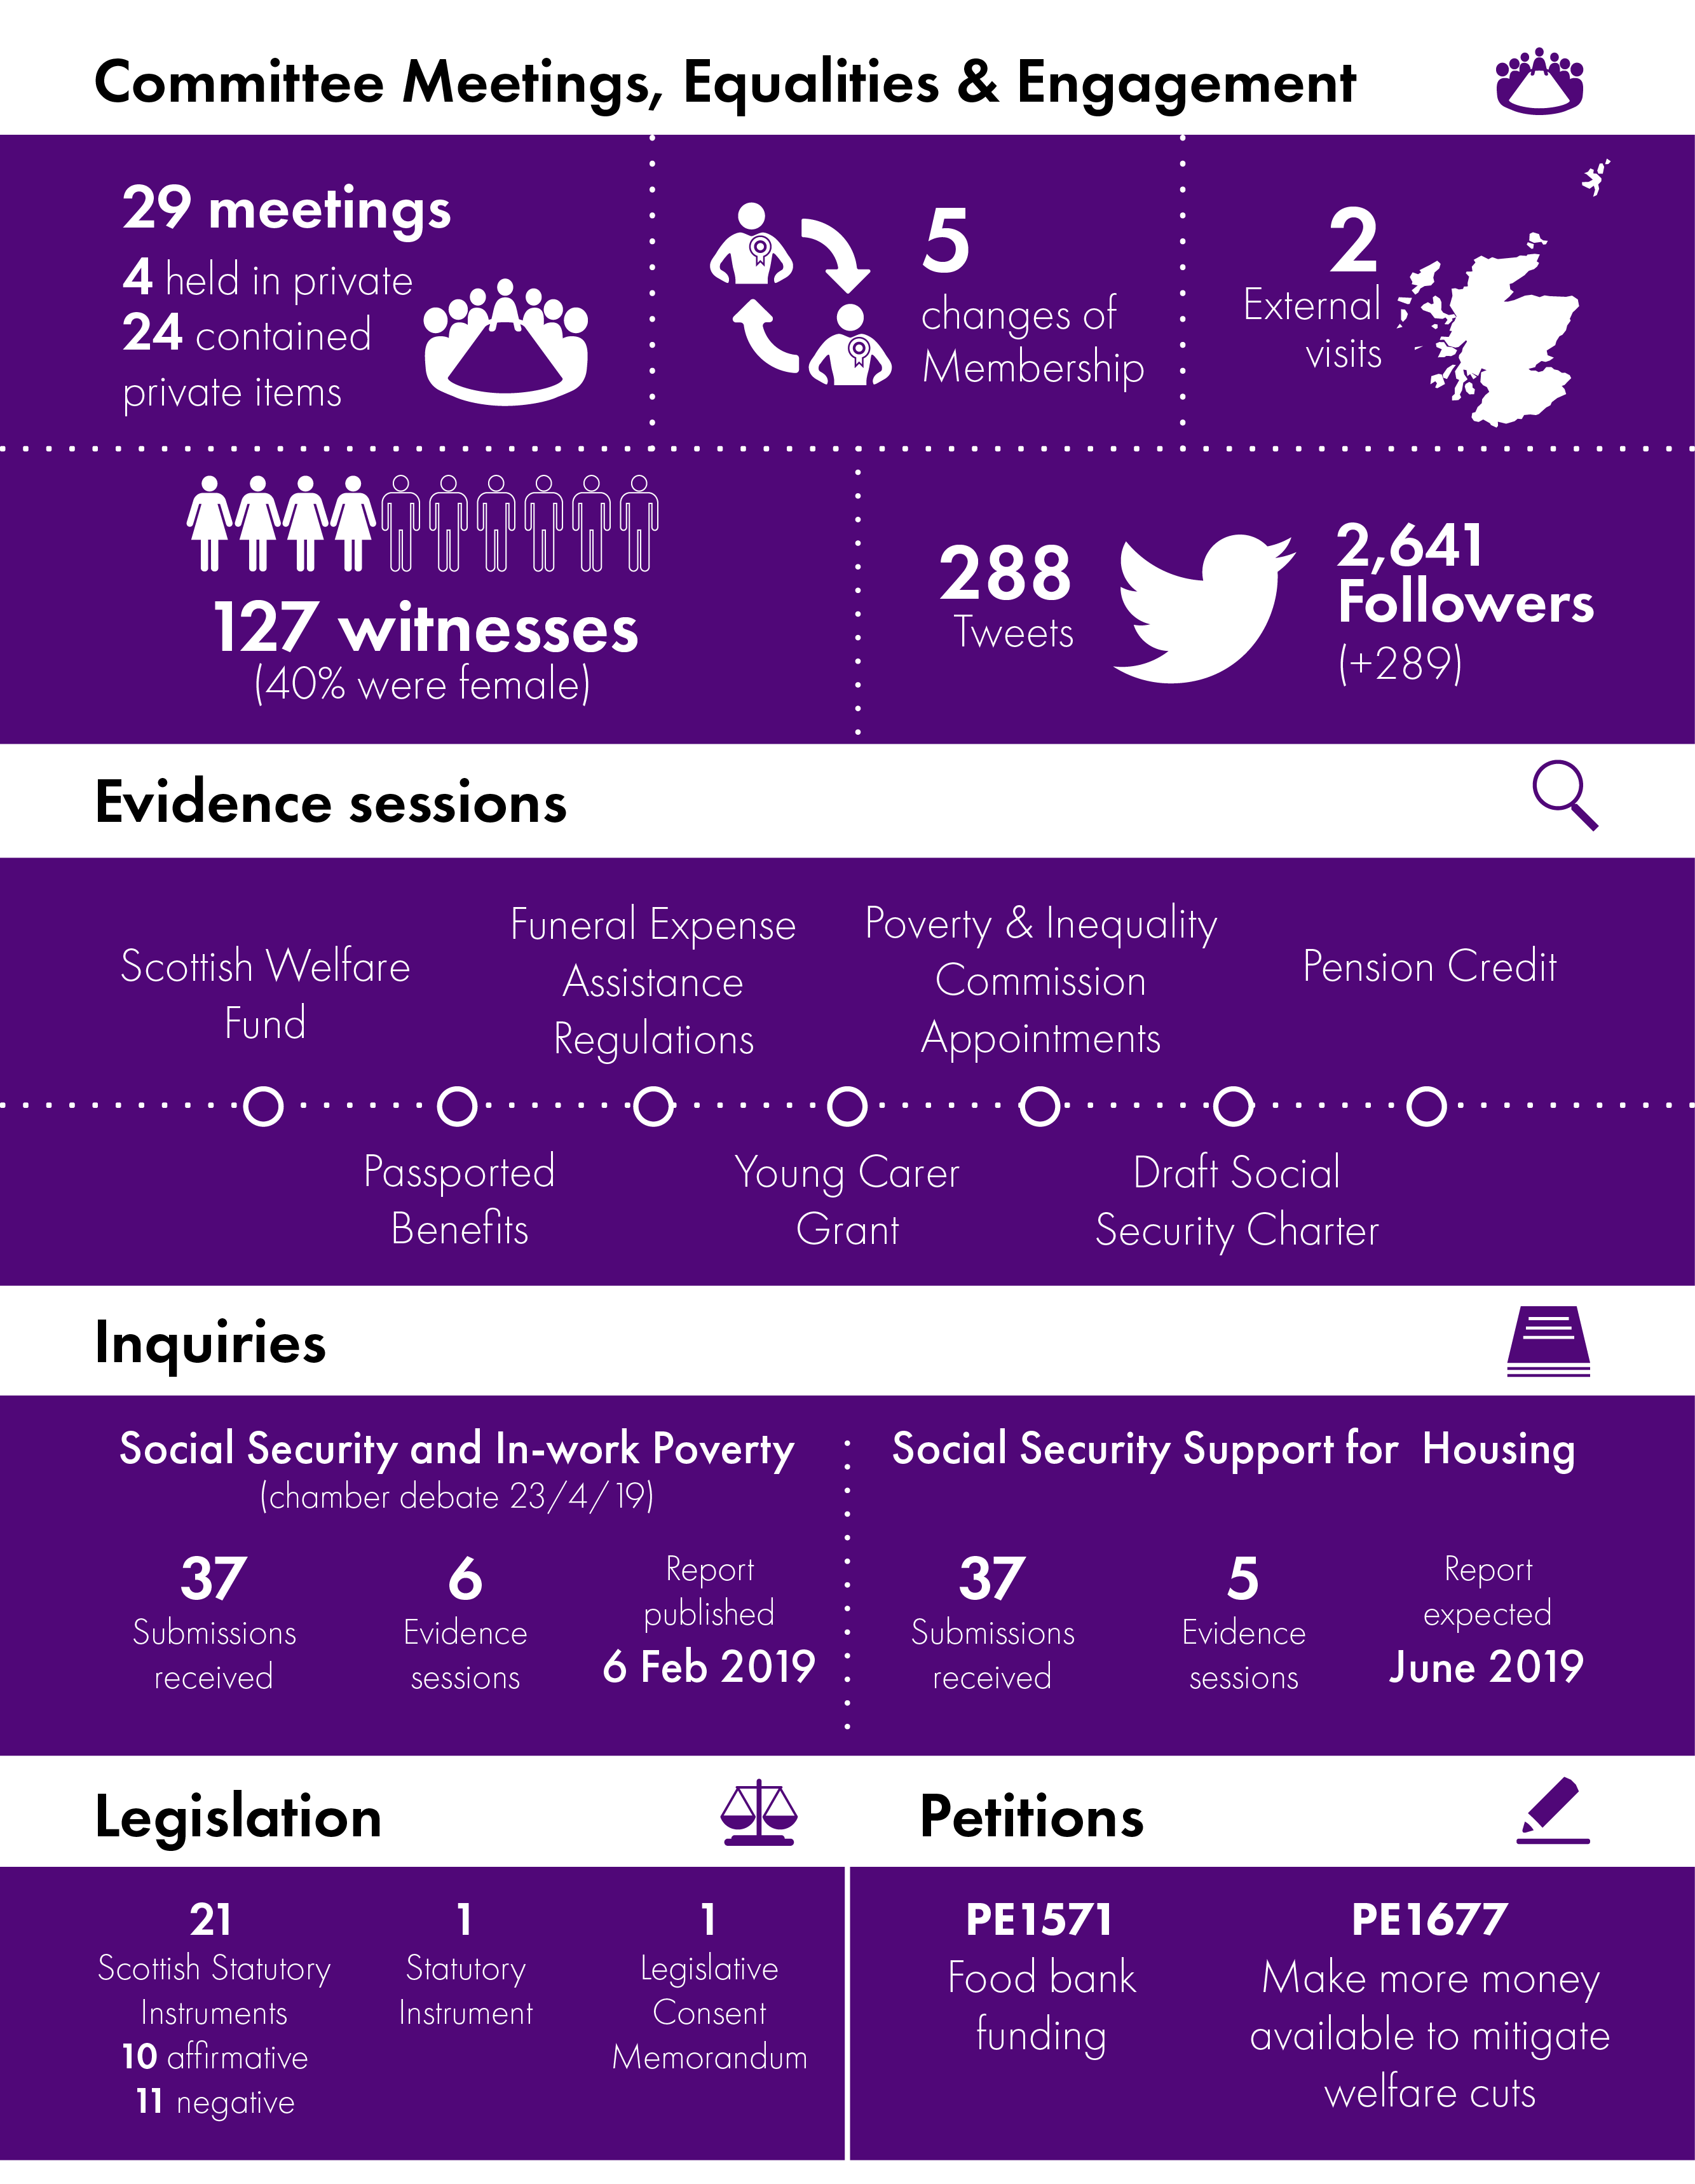 Infographic summarising the work of the Committee from 12 May 2018 to 11 May 2019. The contents of the infographic are detailed in the main report below.